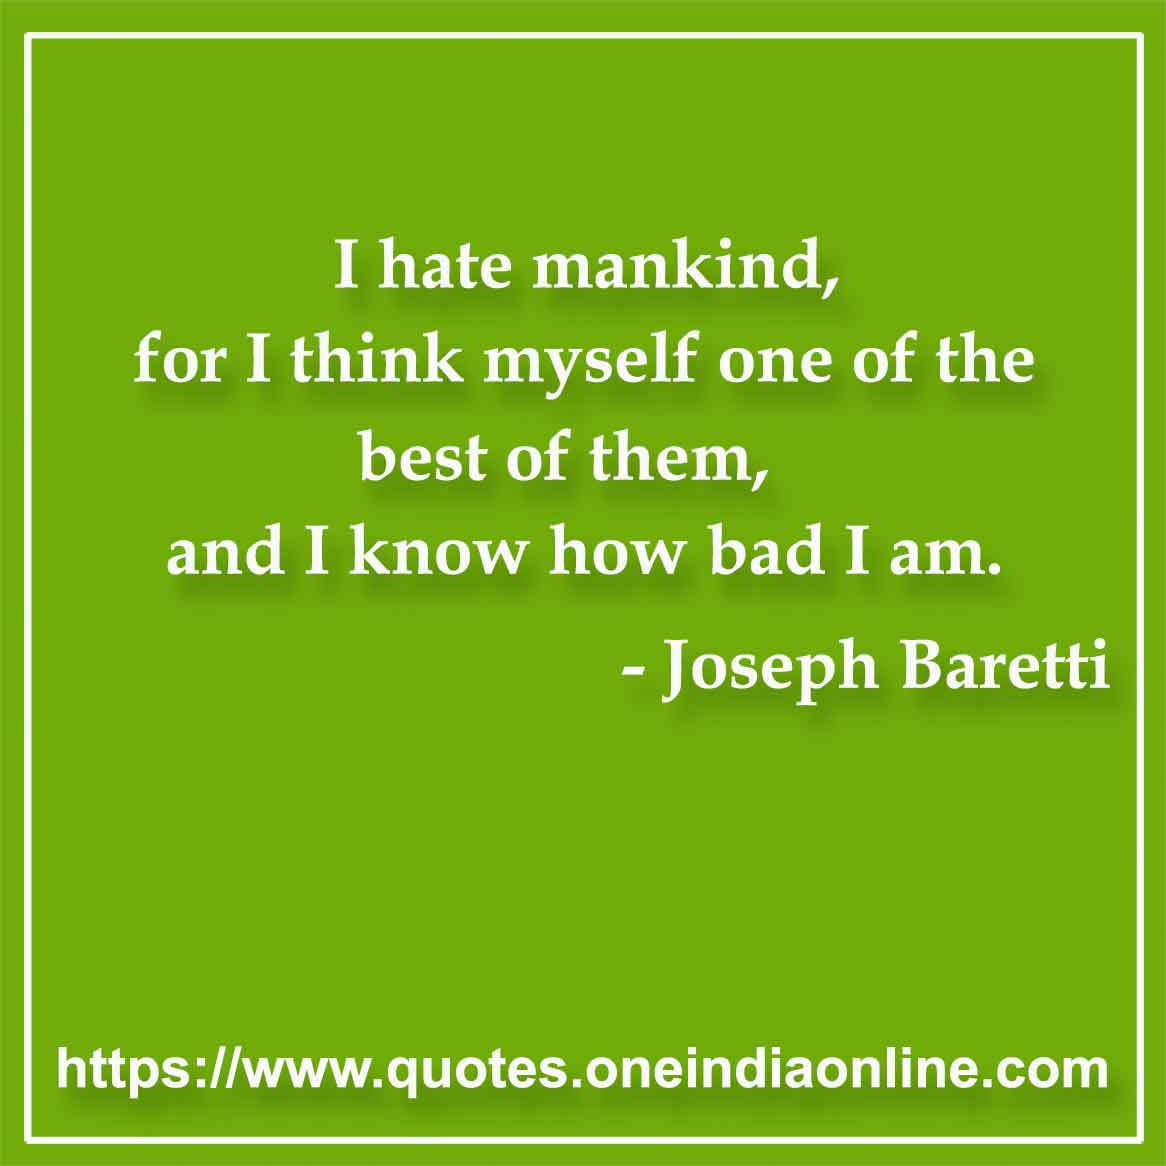 I hate mankind, for I think myself one of the best of them, and I know how bad I am.

- Mankind Quotes by Joseph Baretti 